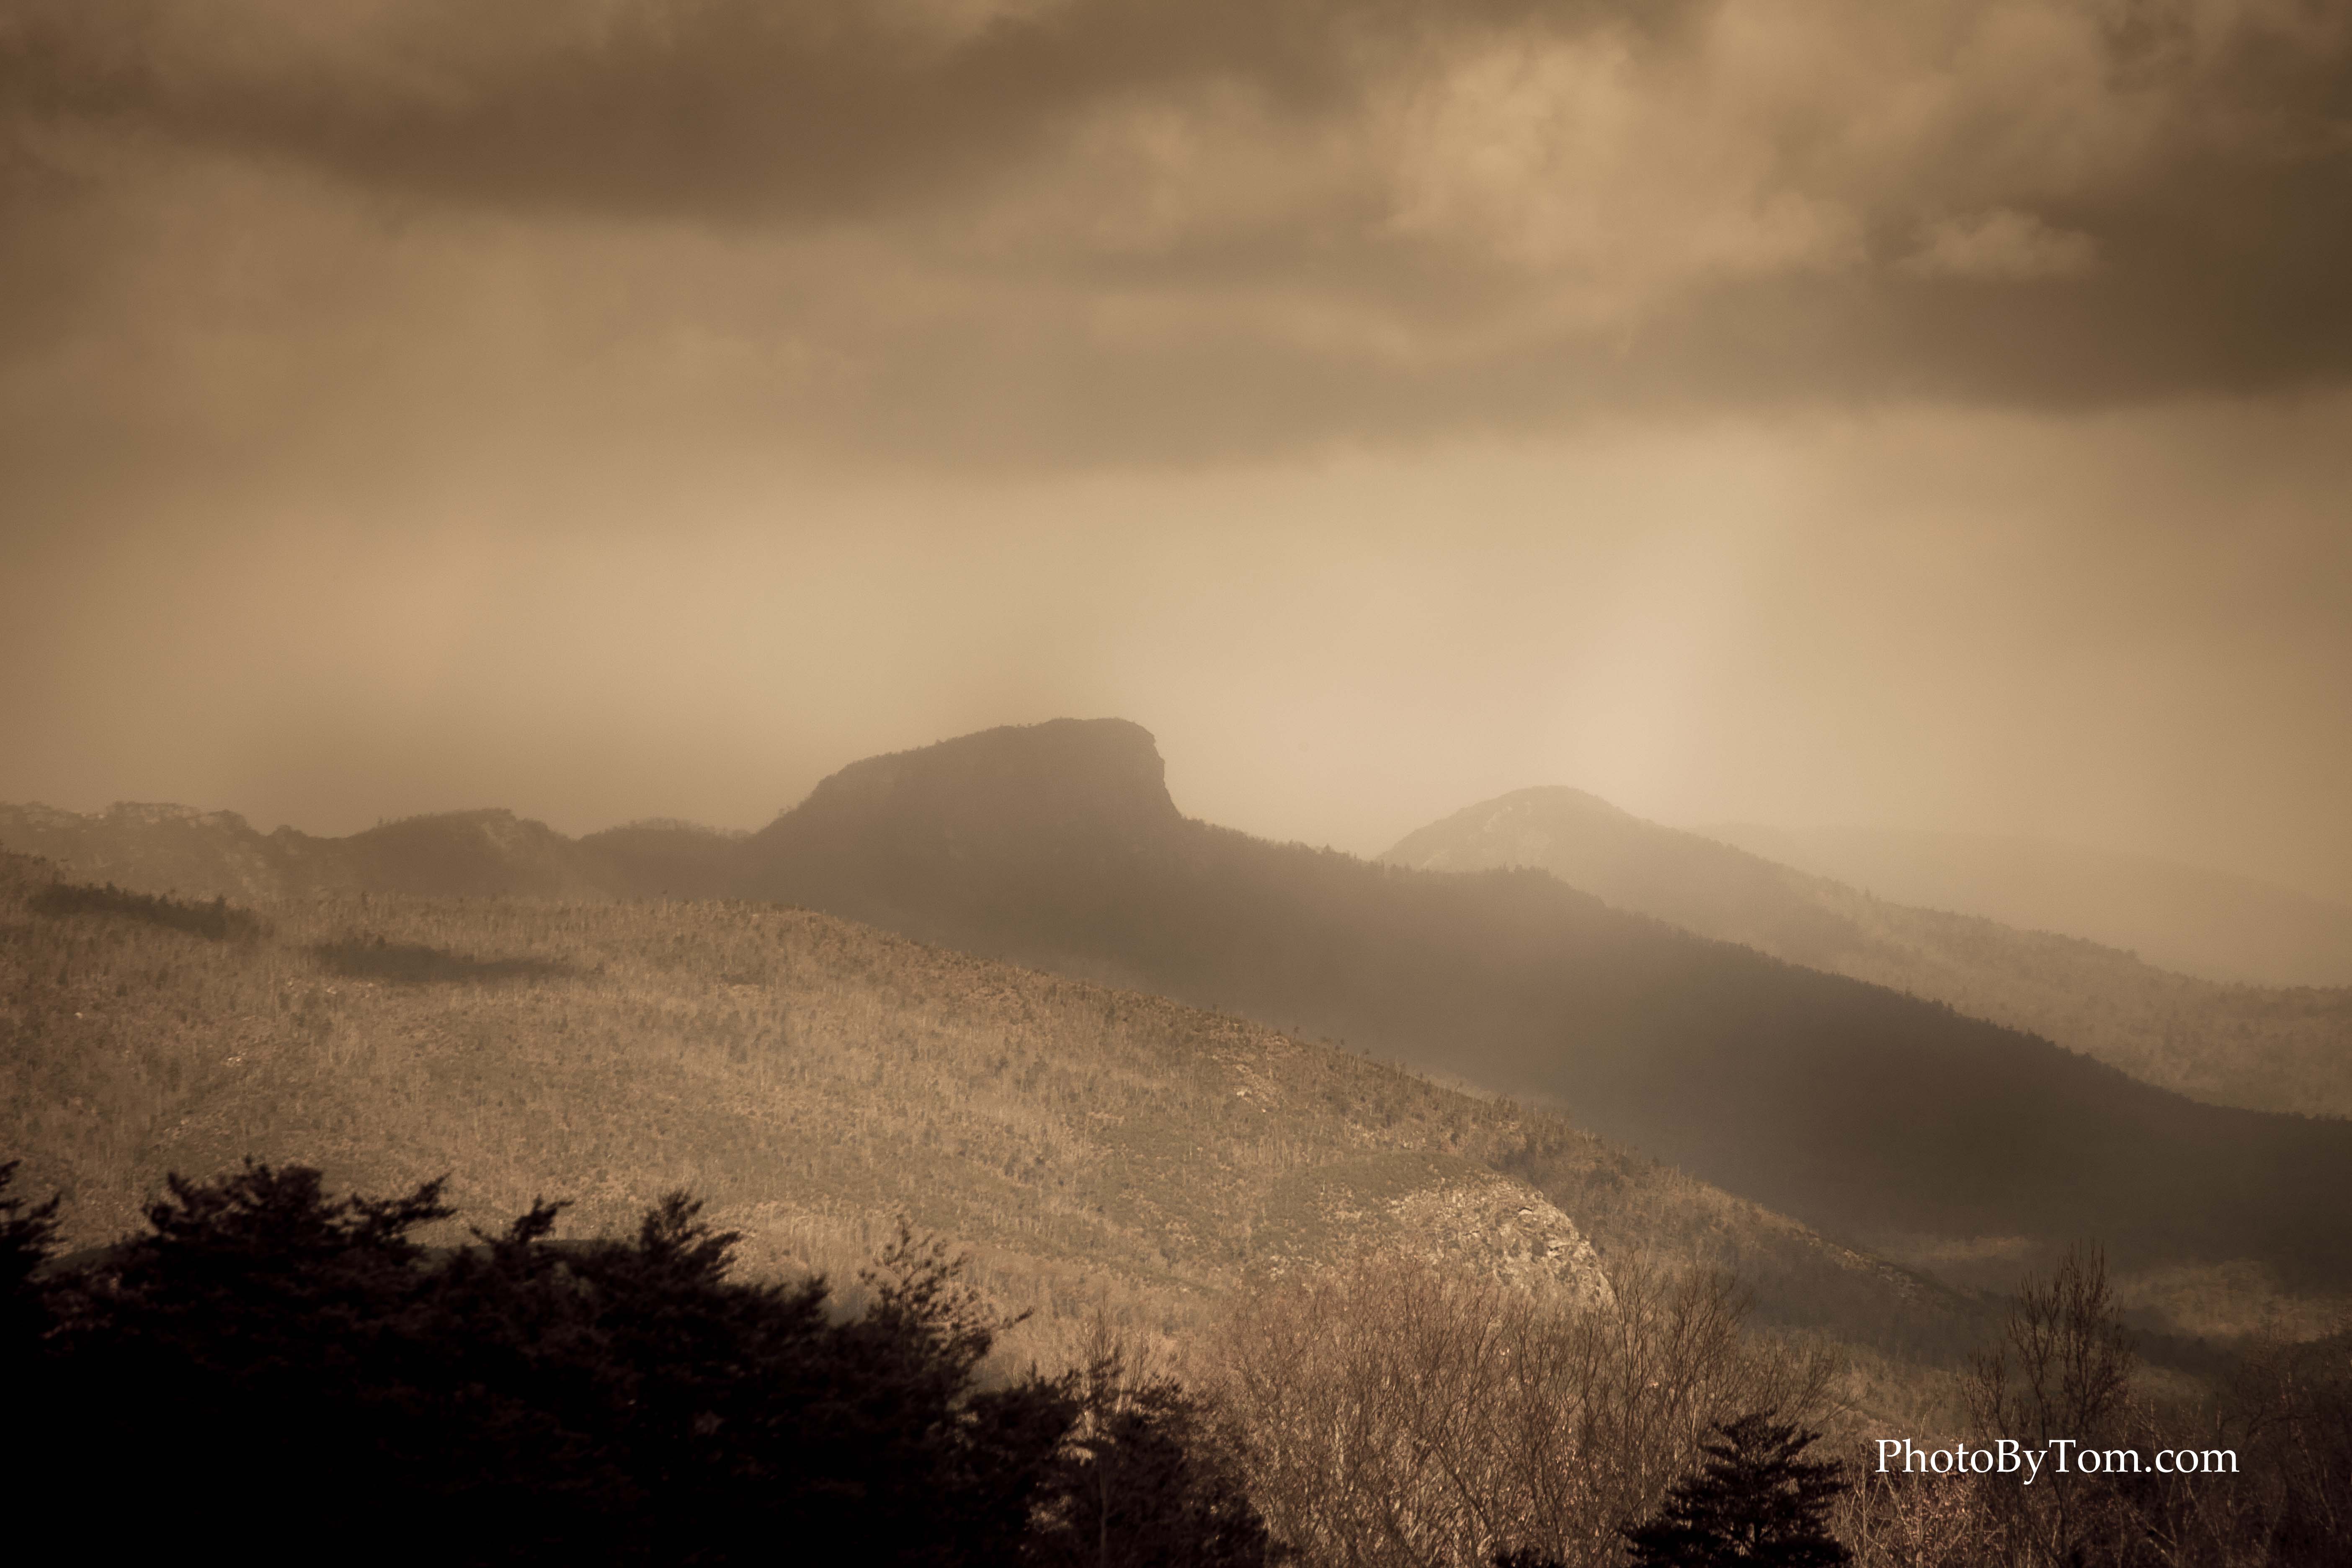 Image of table rock by Asheville chiropractor Tom Whittington